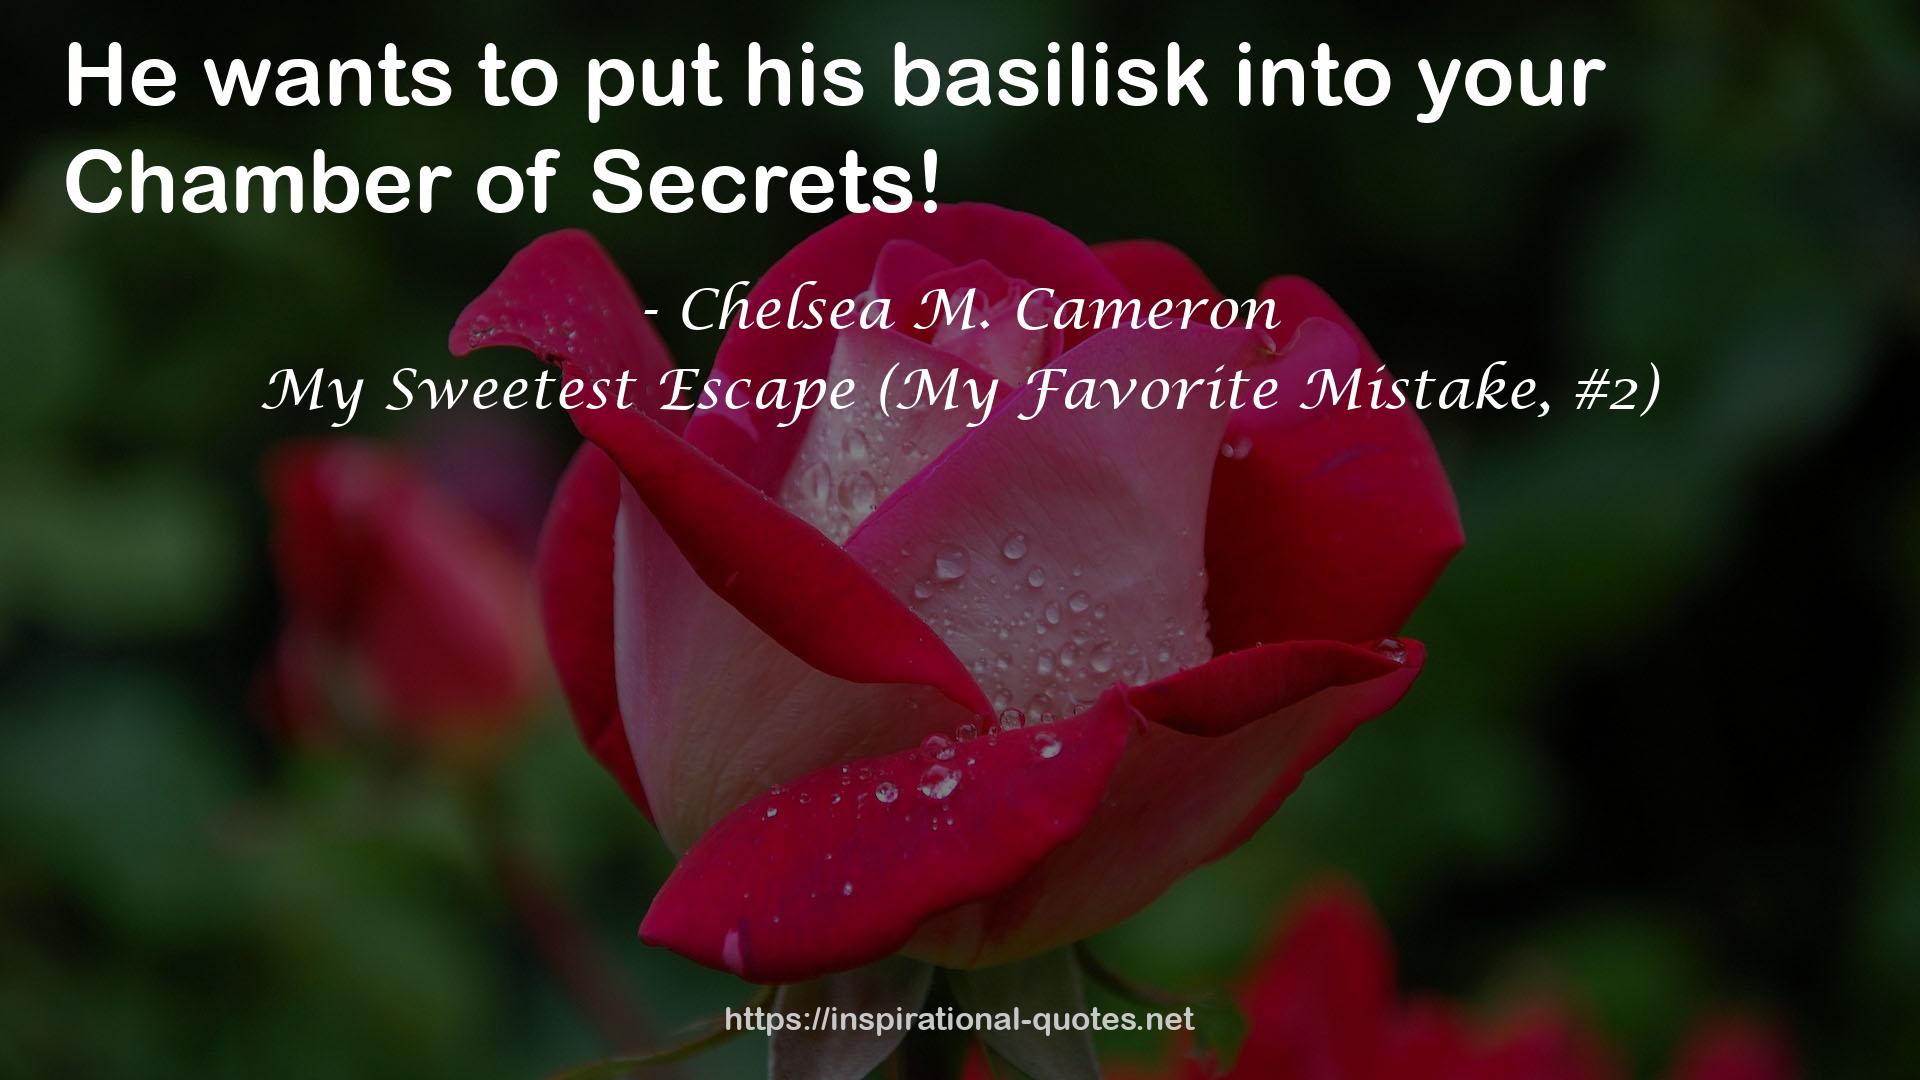 My Sweetest Escape (My Favorite Mistake, #2) QUOTES